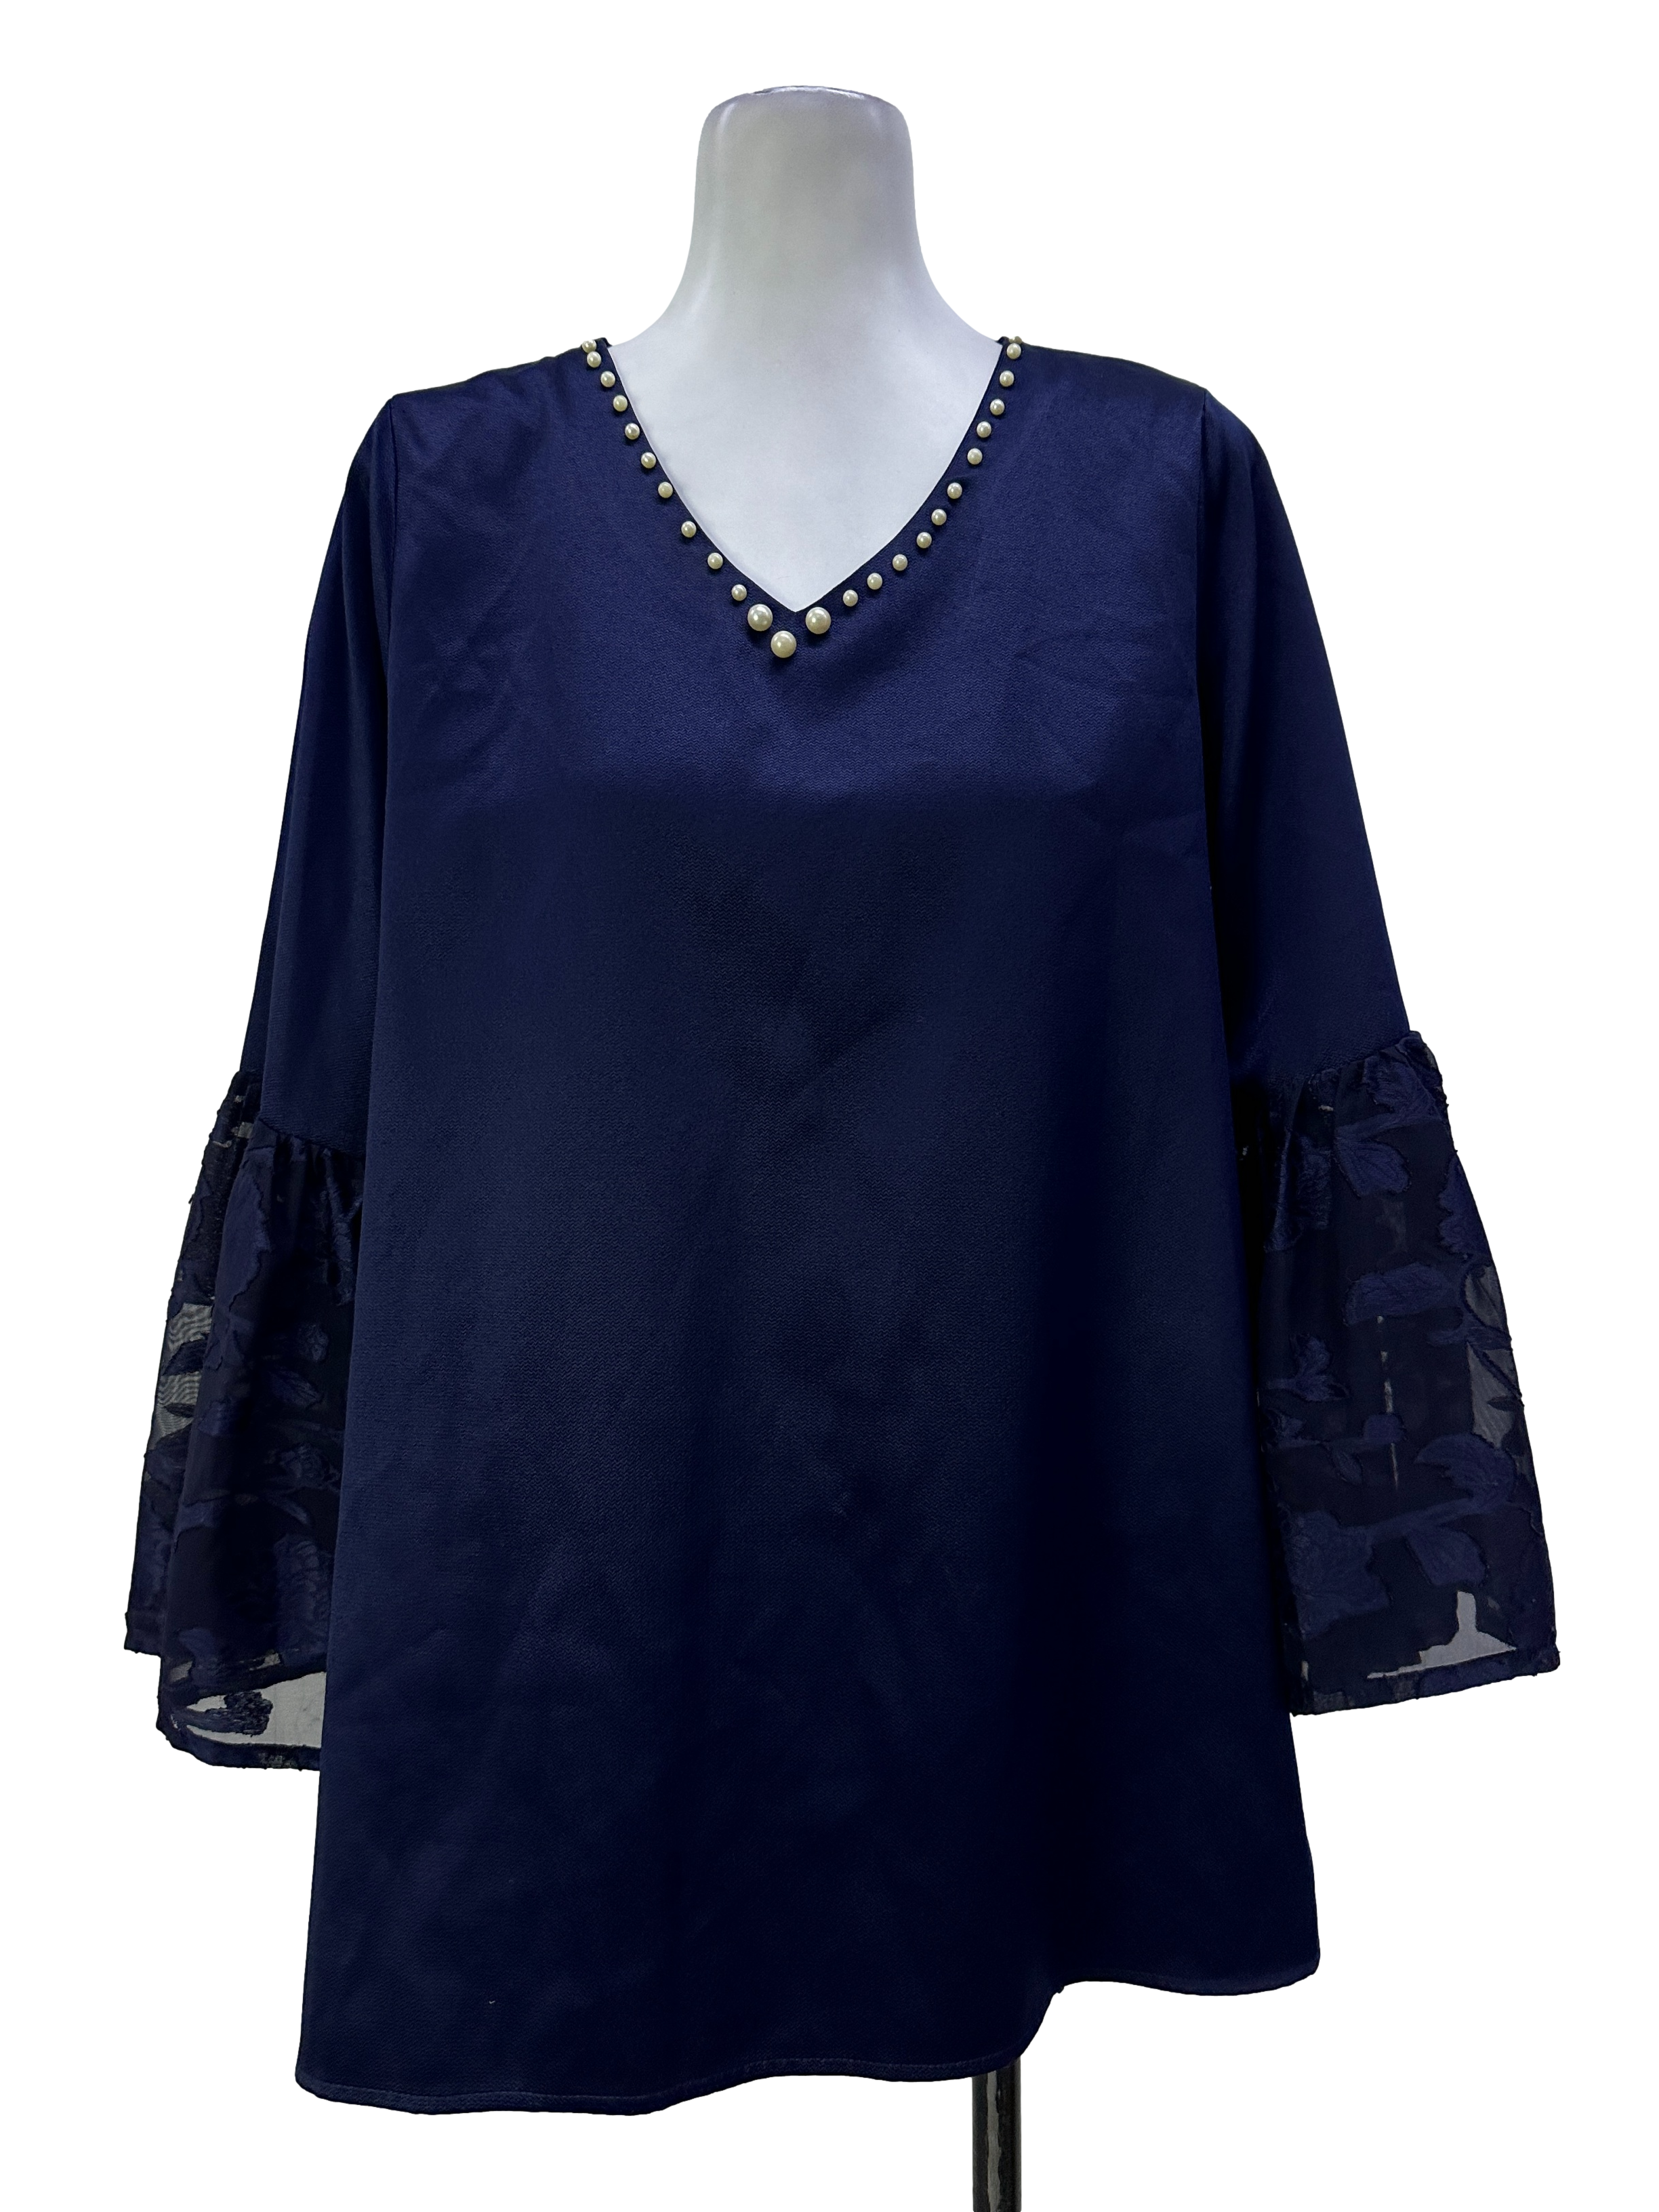 Navy Blue Pearl Beaded & Lace Sleeve Top